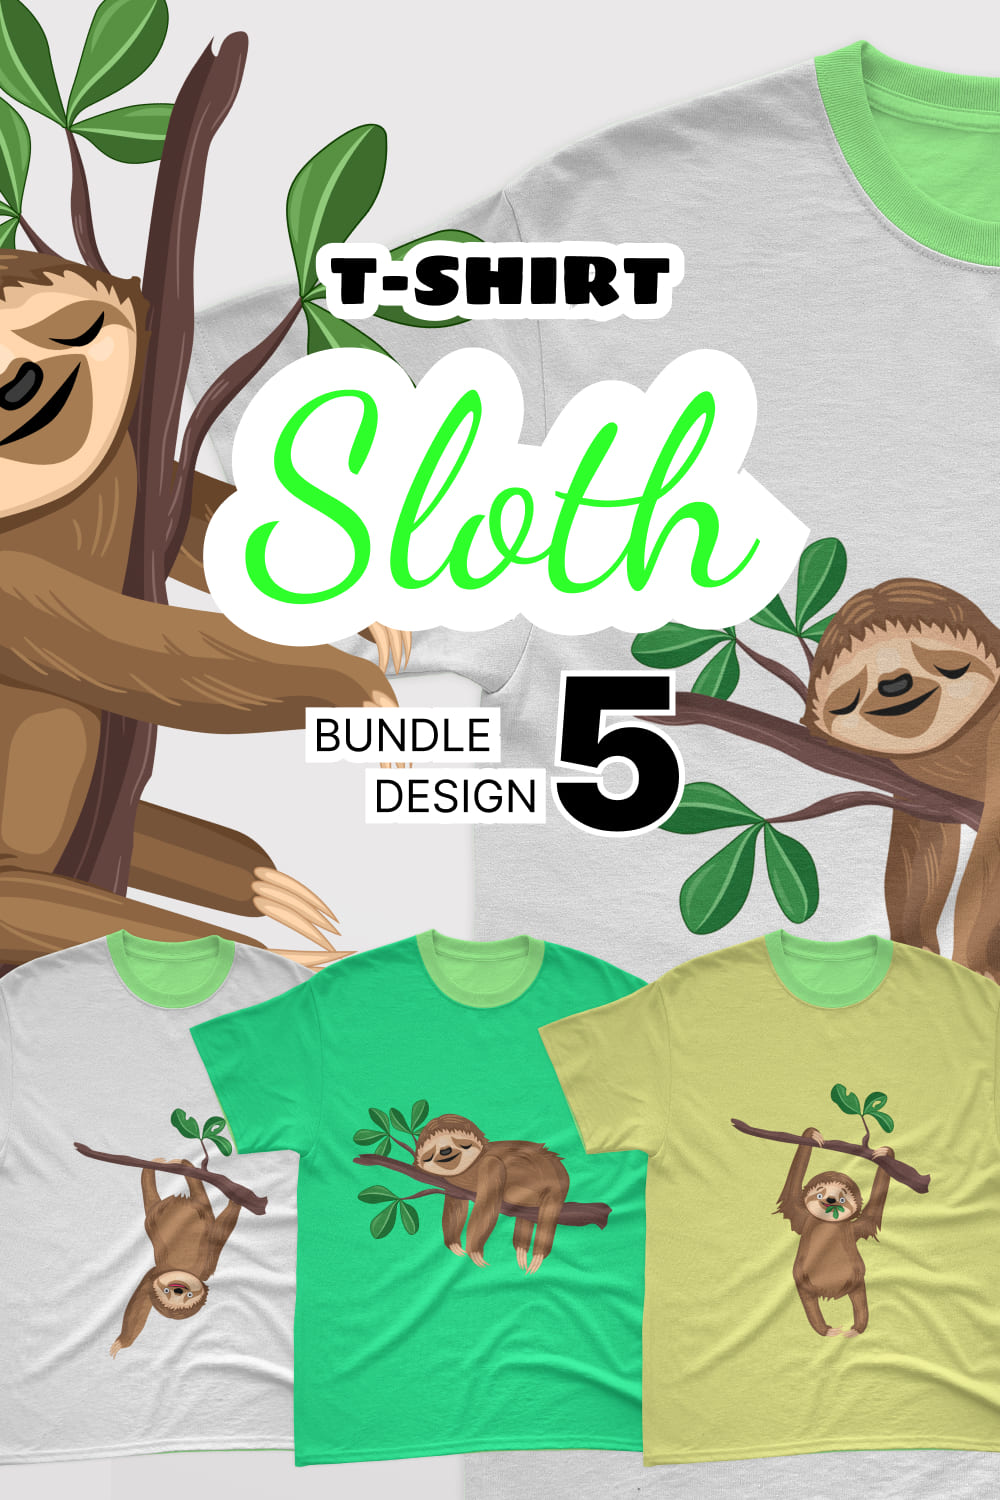 A set of white t-shirts with an adorable cartoon sloth print.